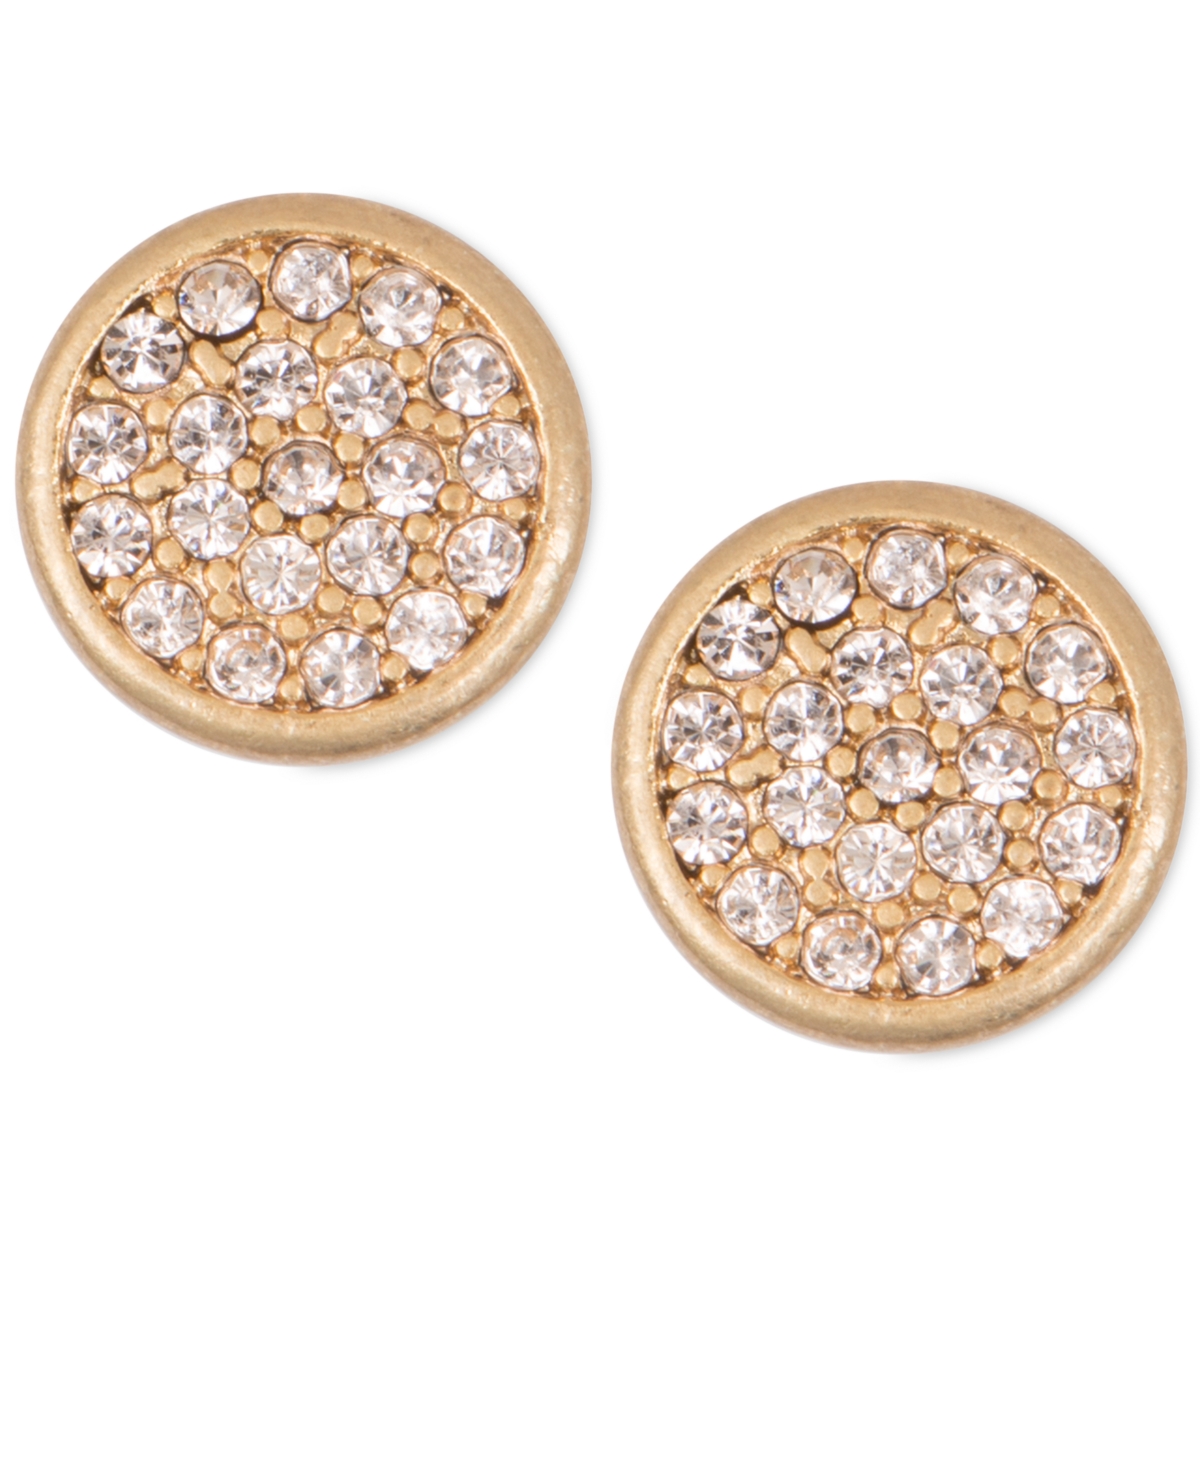 Mixed Metal Pave Disc Stud Earrings - Gold